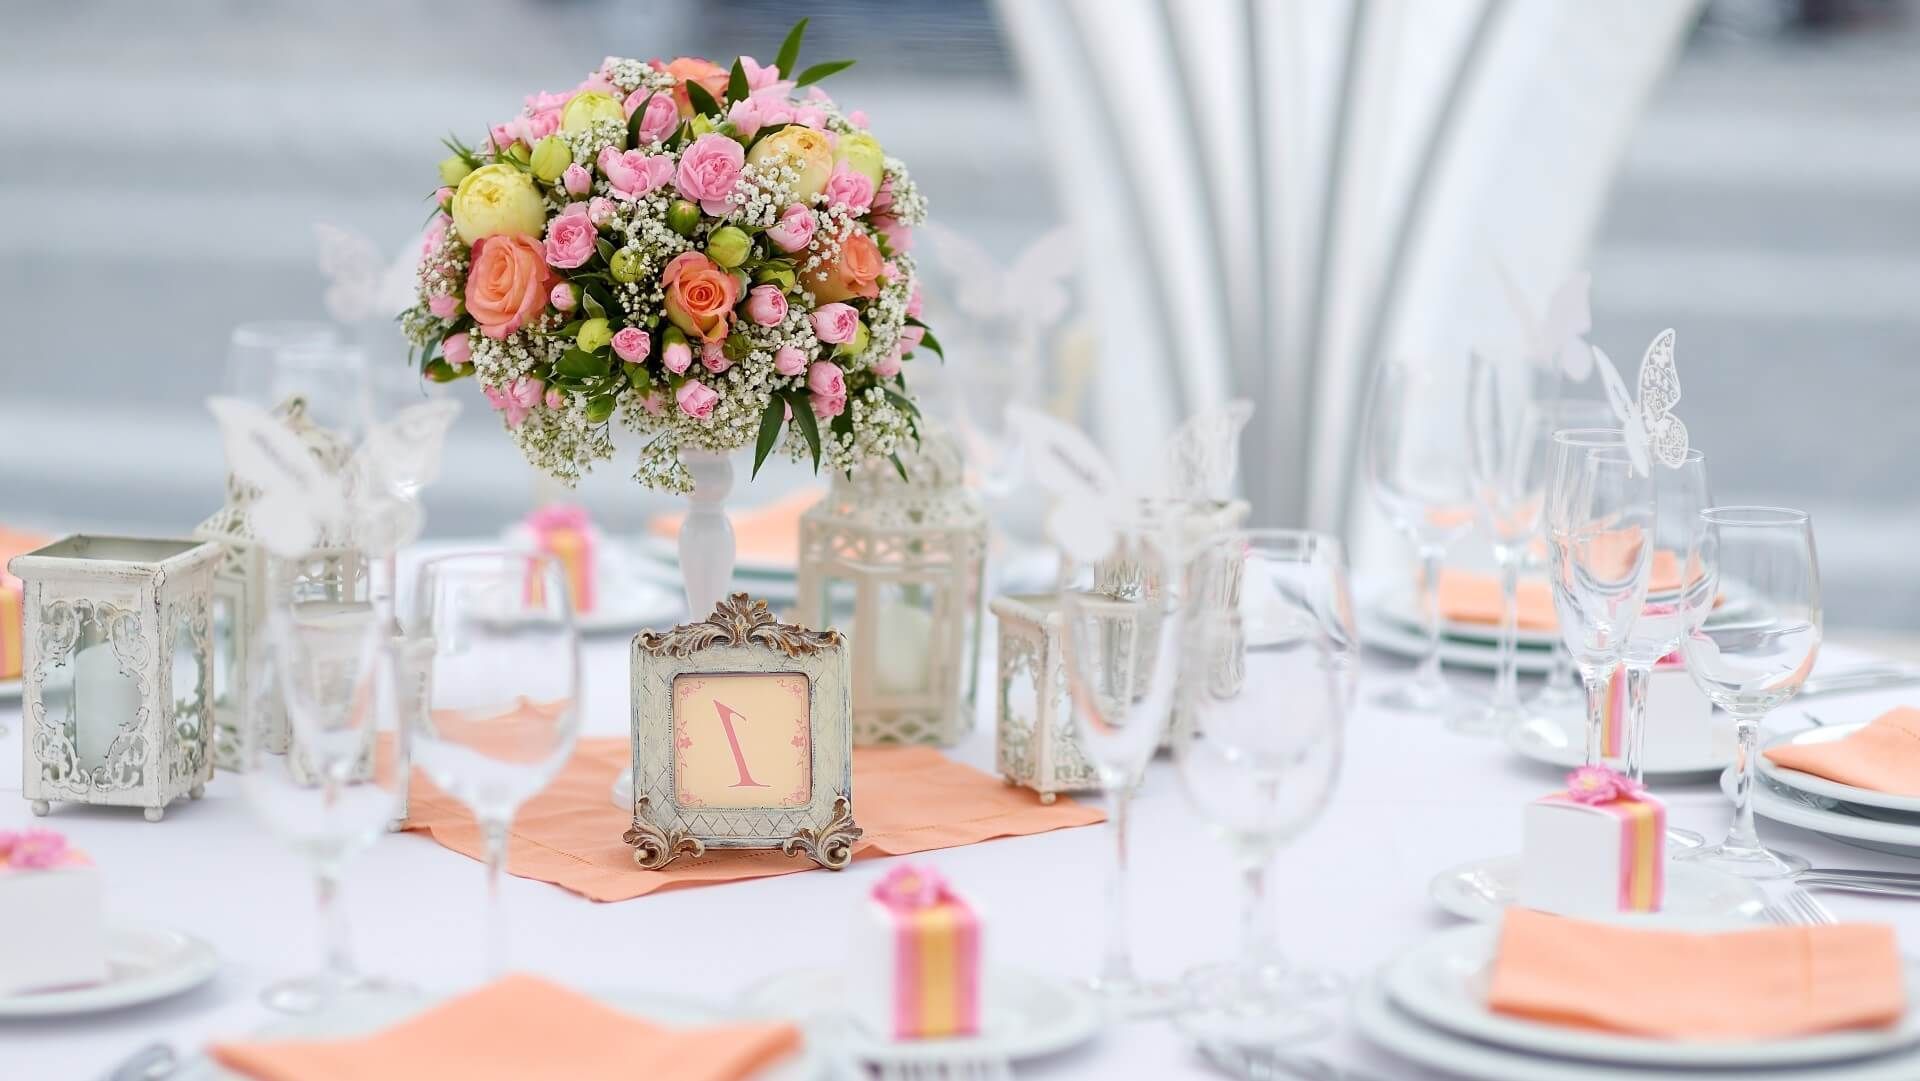 A beautiful salmon and pink-colored theme wedding reception